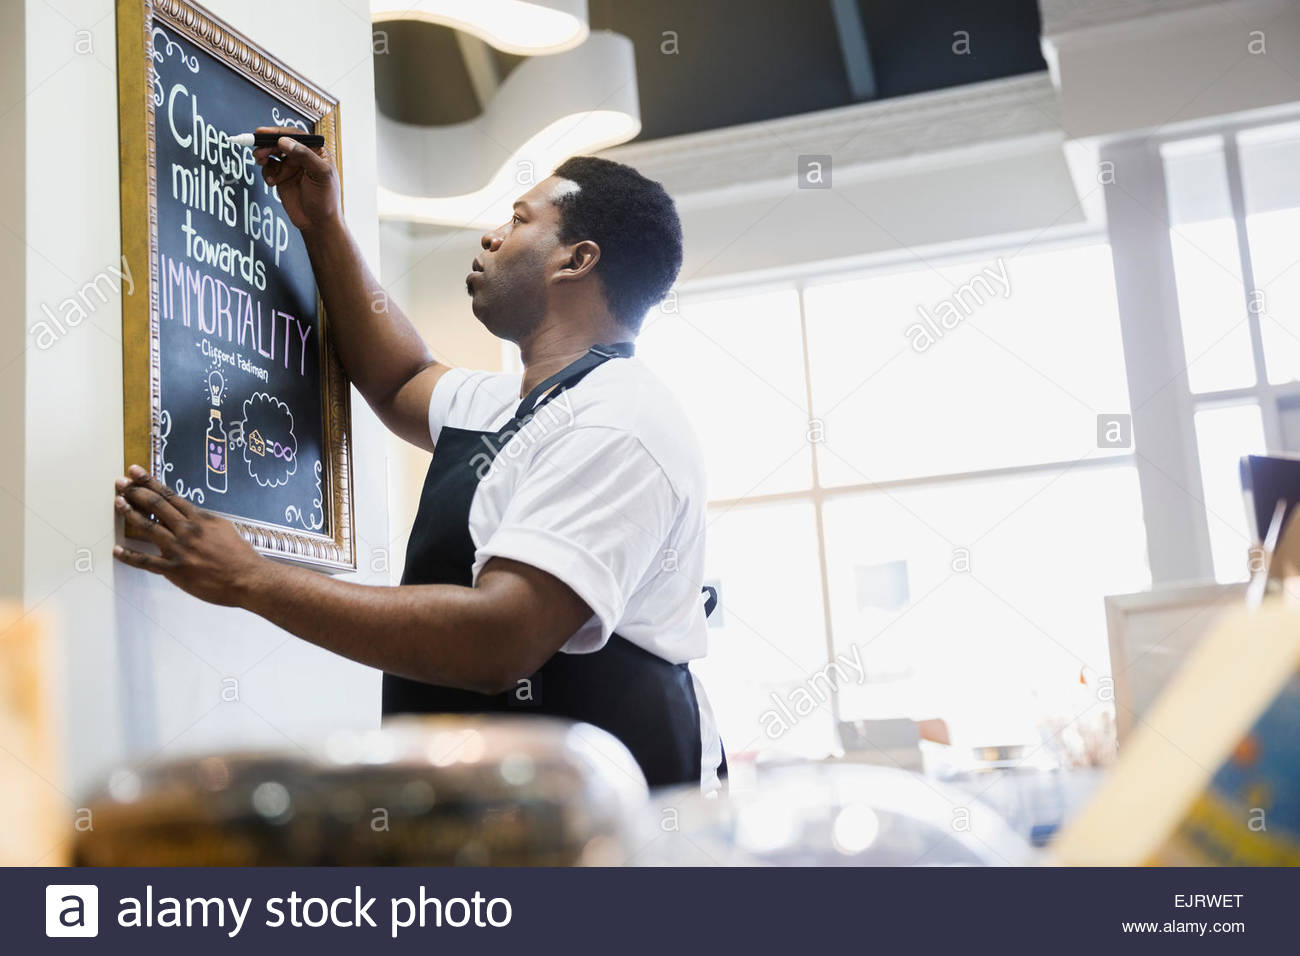 Grocery business owner writing on blackboard Stock Photo